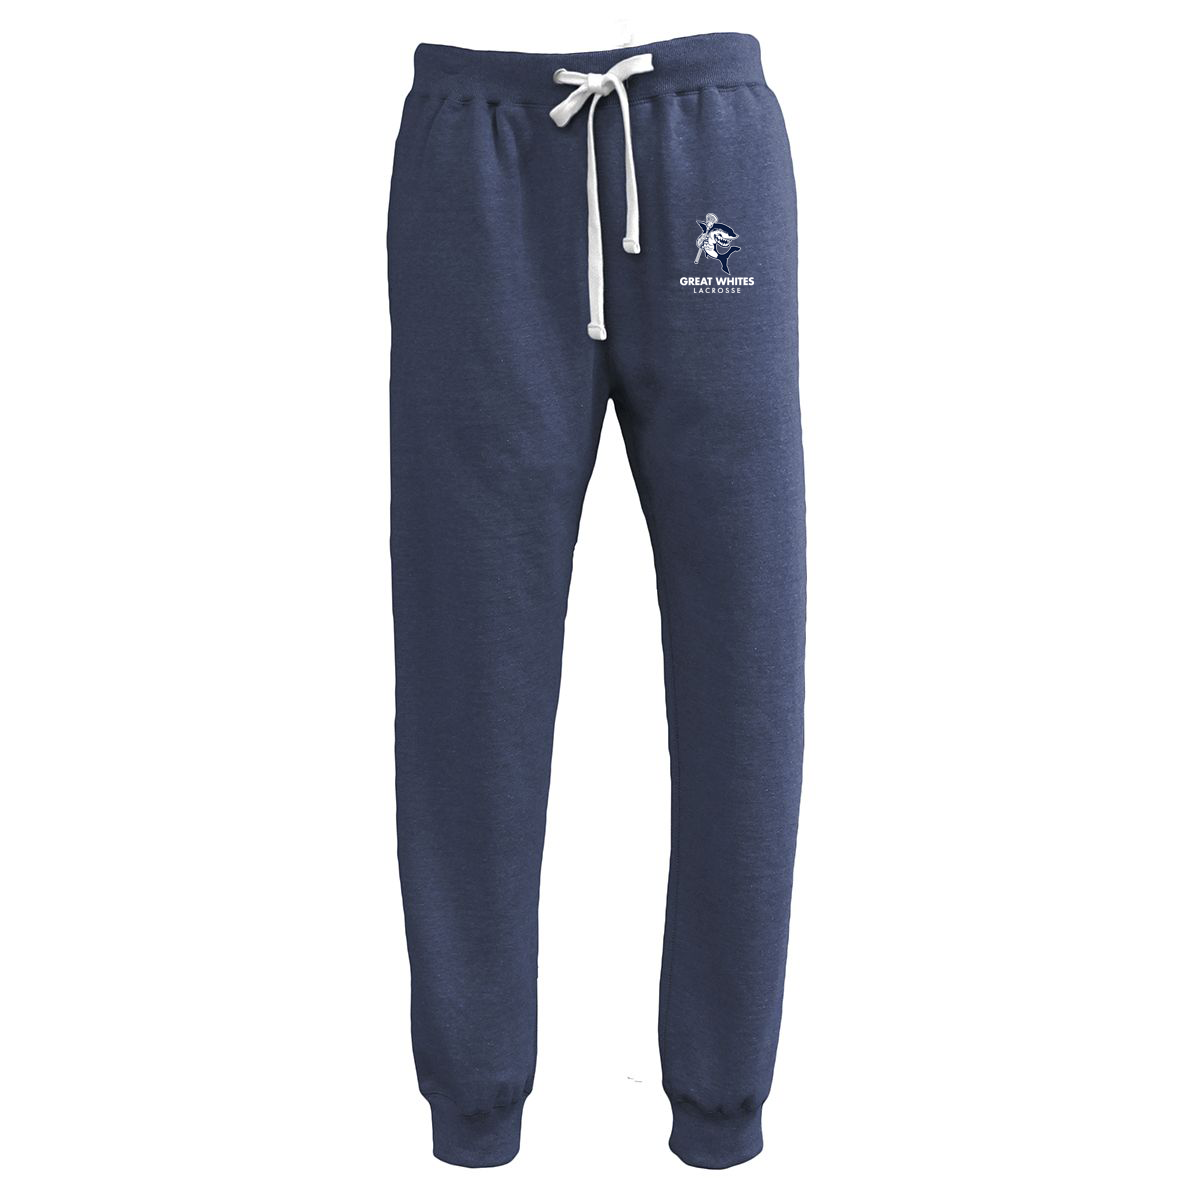 Great Whites Lacrosse Joggers